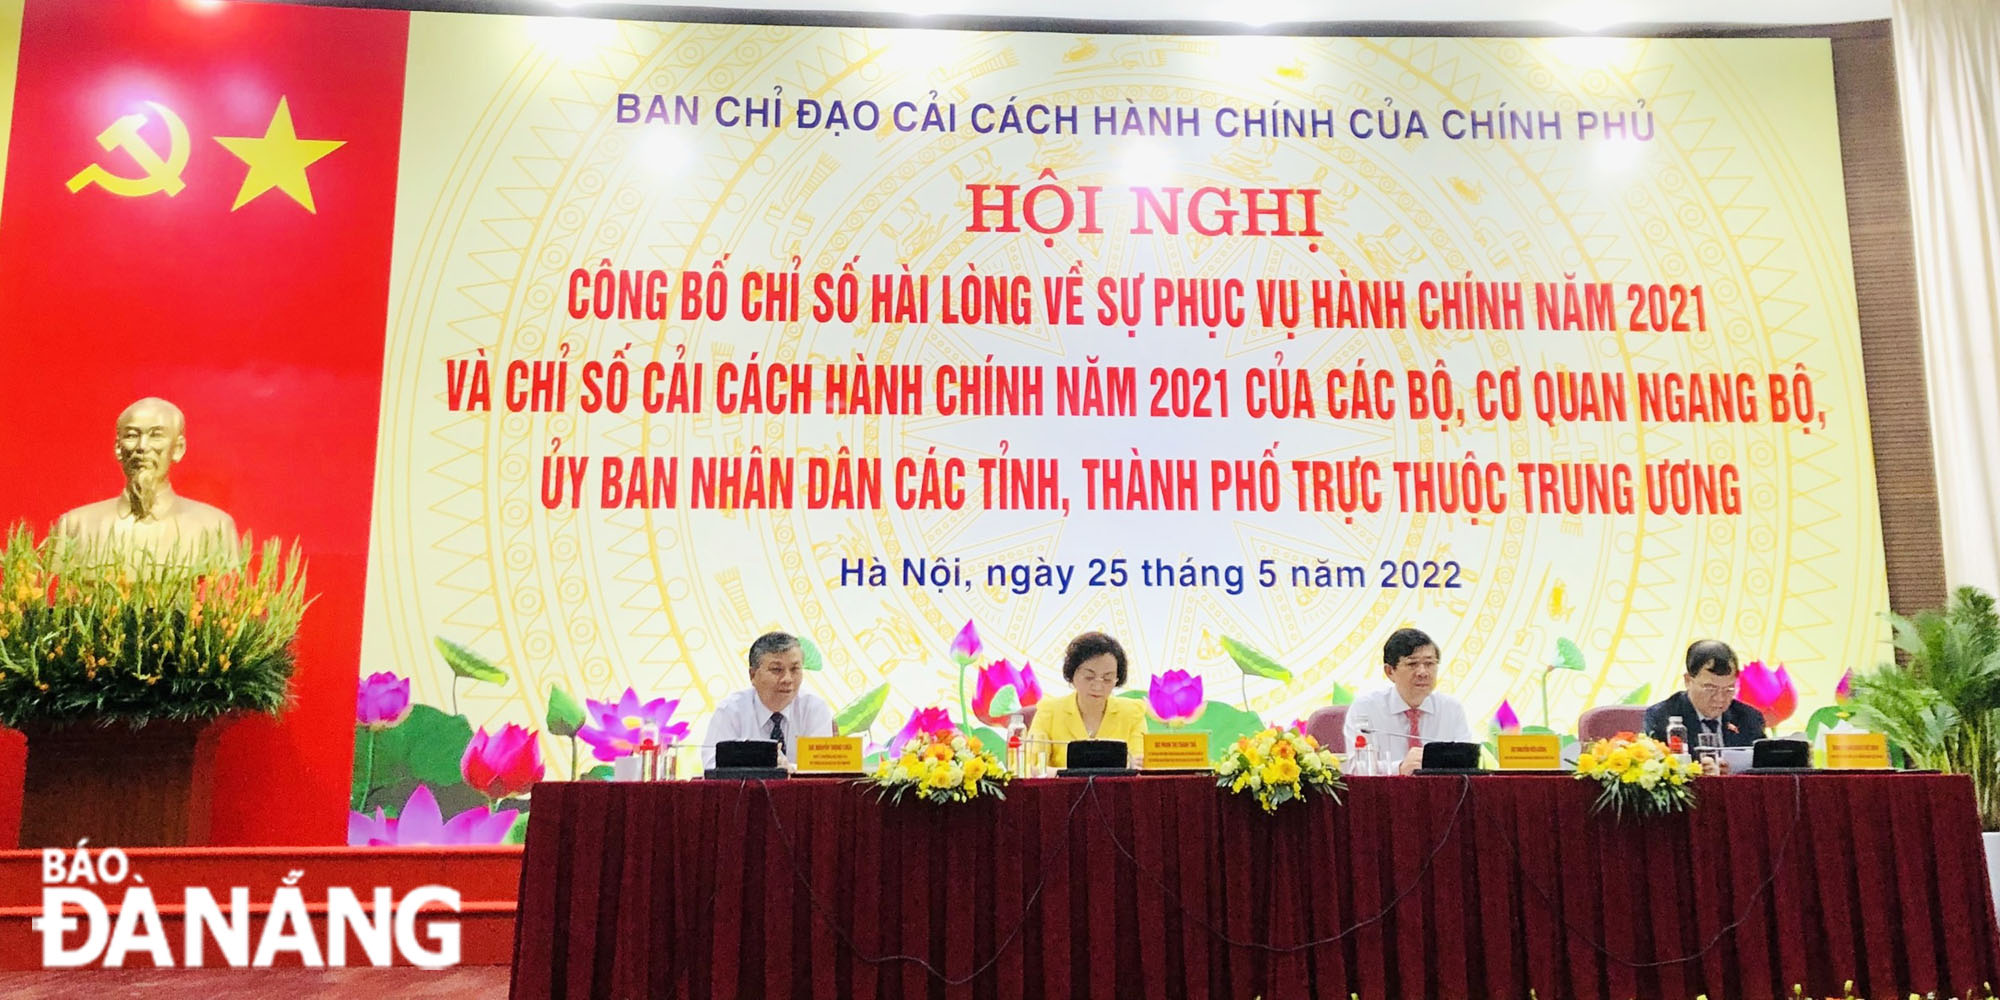 The PAR Index 2021 ranking was released by national government’s Steering Committee for Administrative Reform in the capital city of Ha Noi on May 25, 2022.